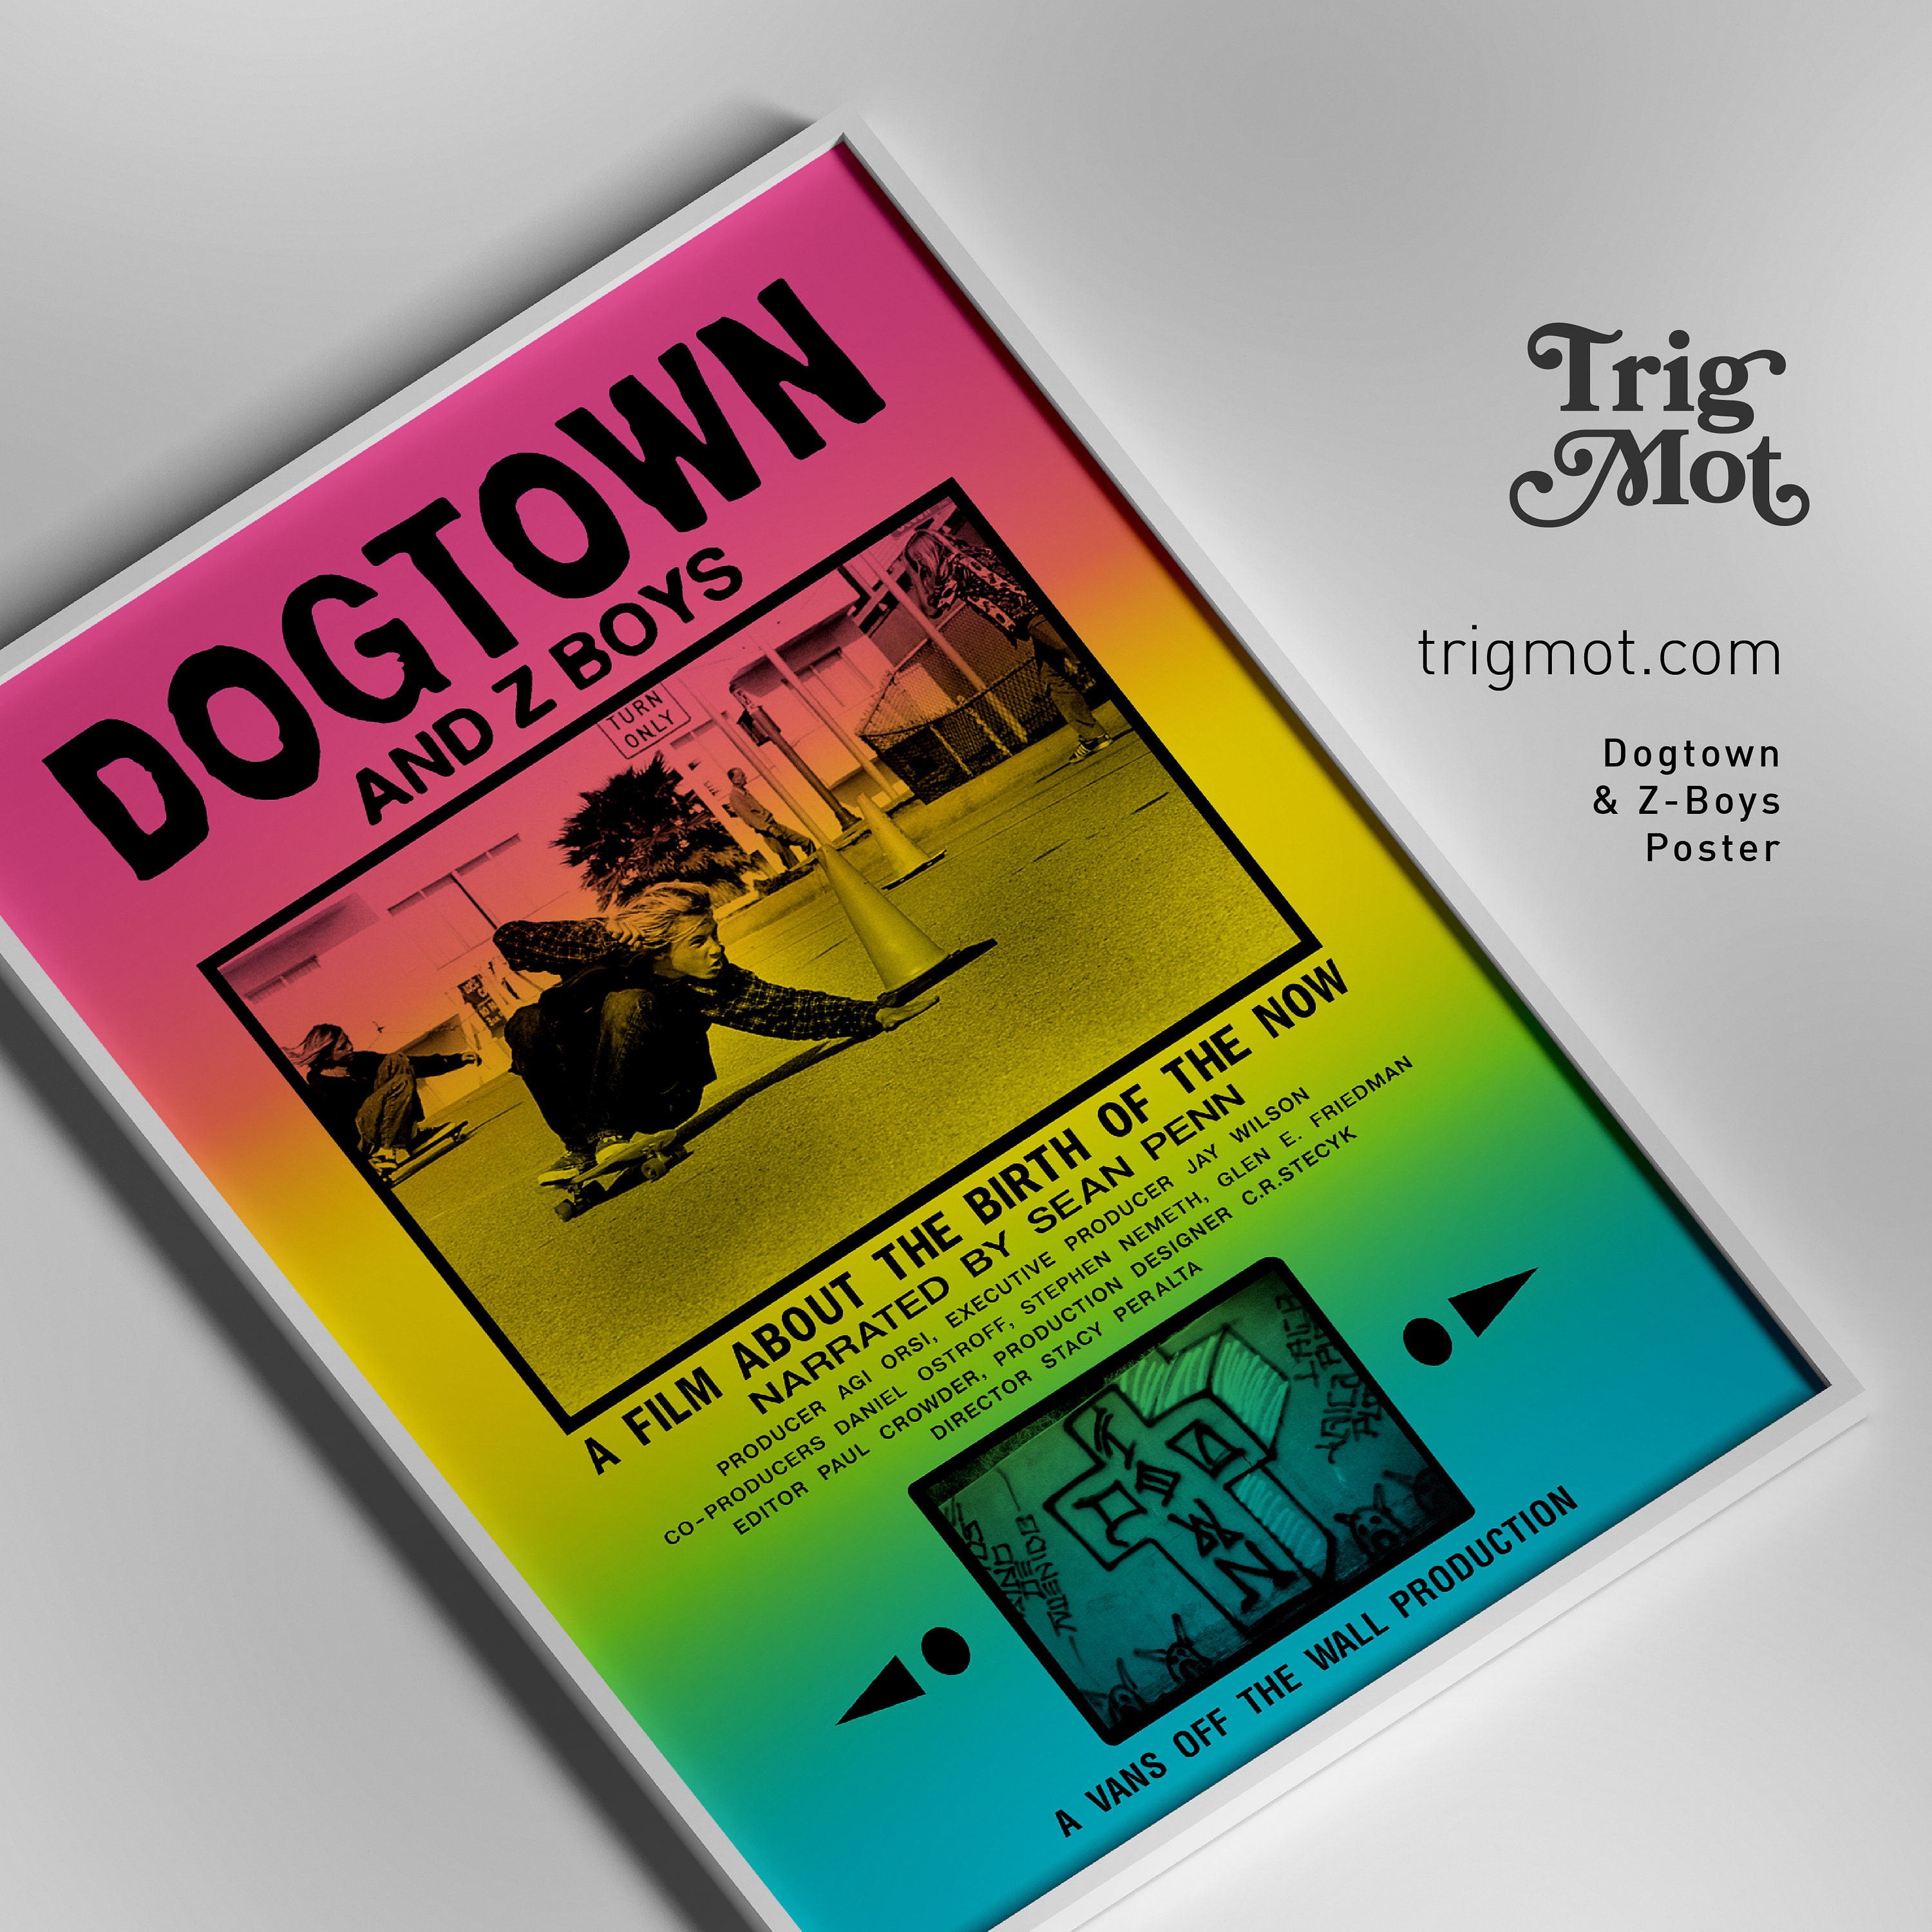 DOGTOWN and Z-Boys vintage poster